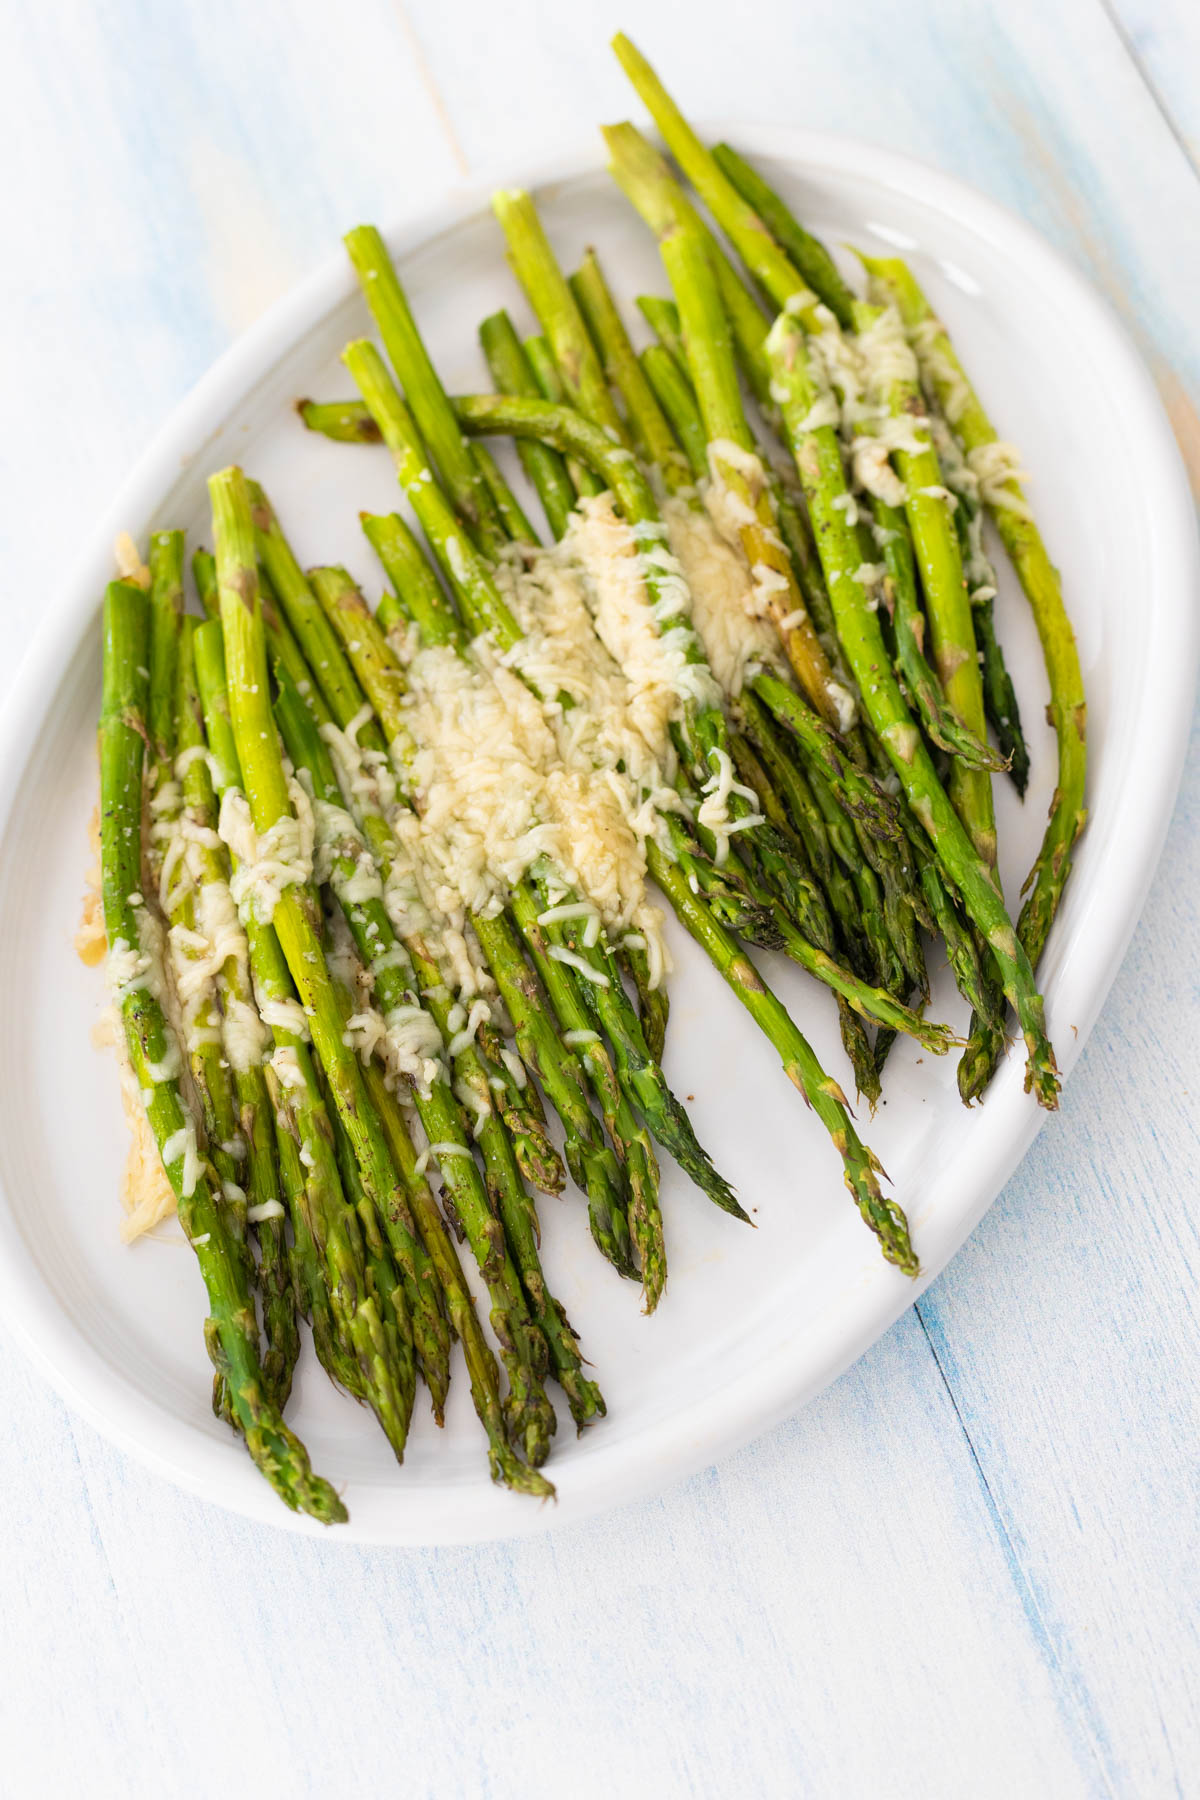 The asparagus is served on a white platter.